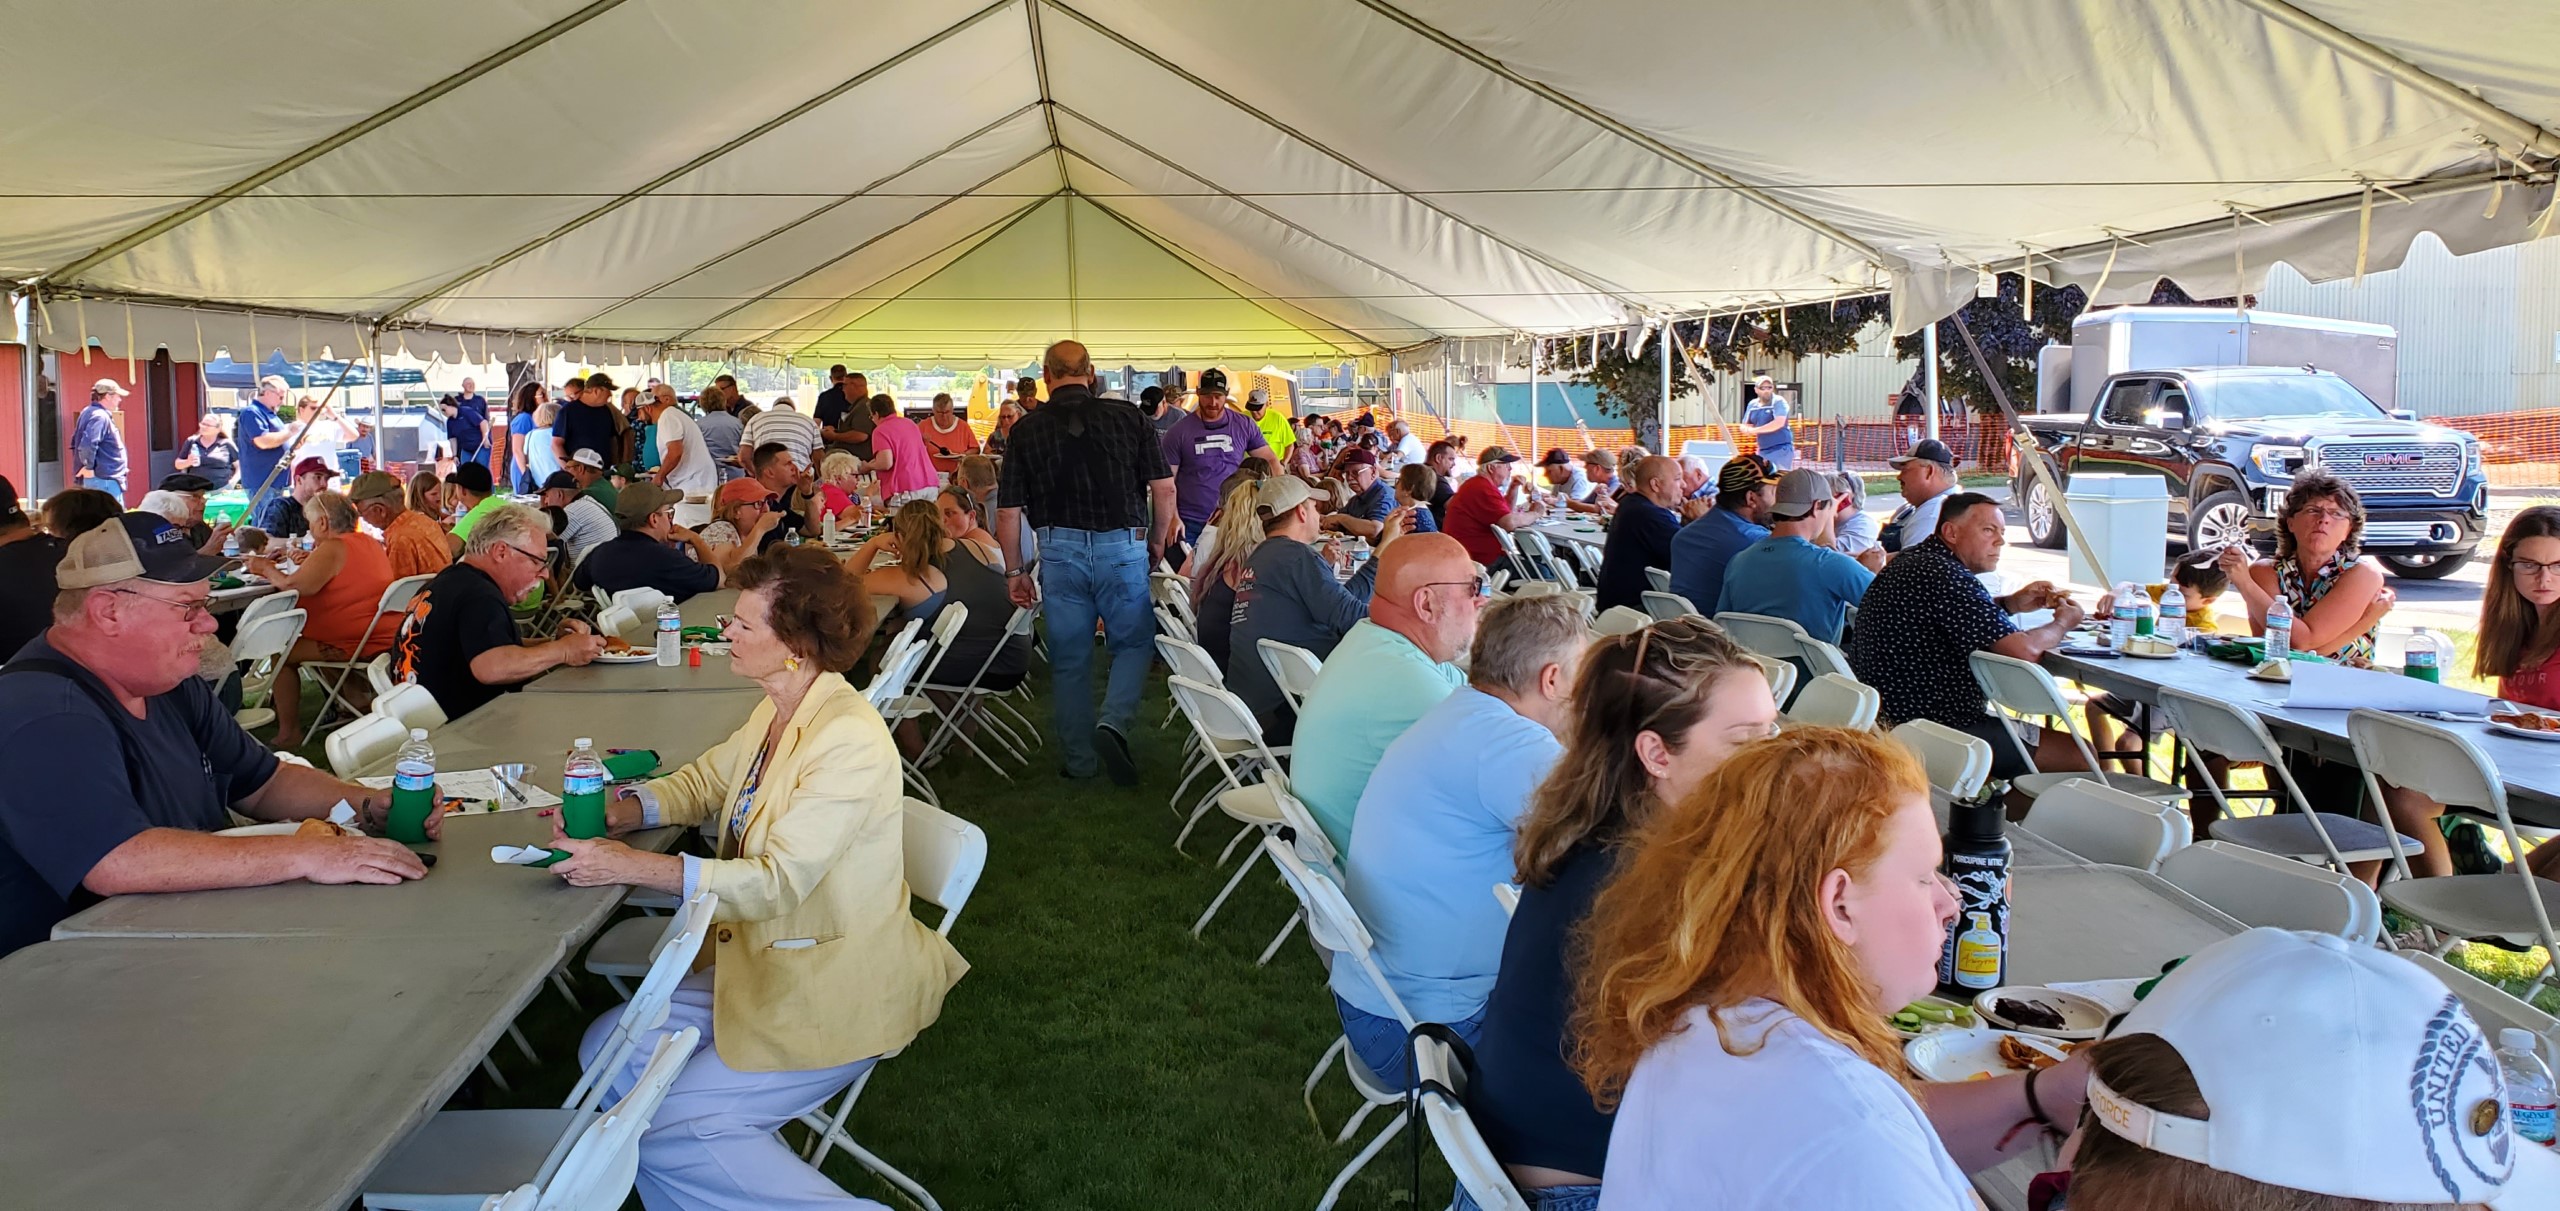 In addition to elected officials, more than 350 employees, family members and community members came out to celebrate the mill's anniversary with prize drawings, a catered lunch and souvenirs.